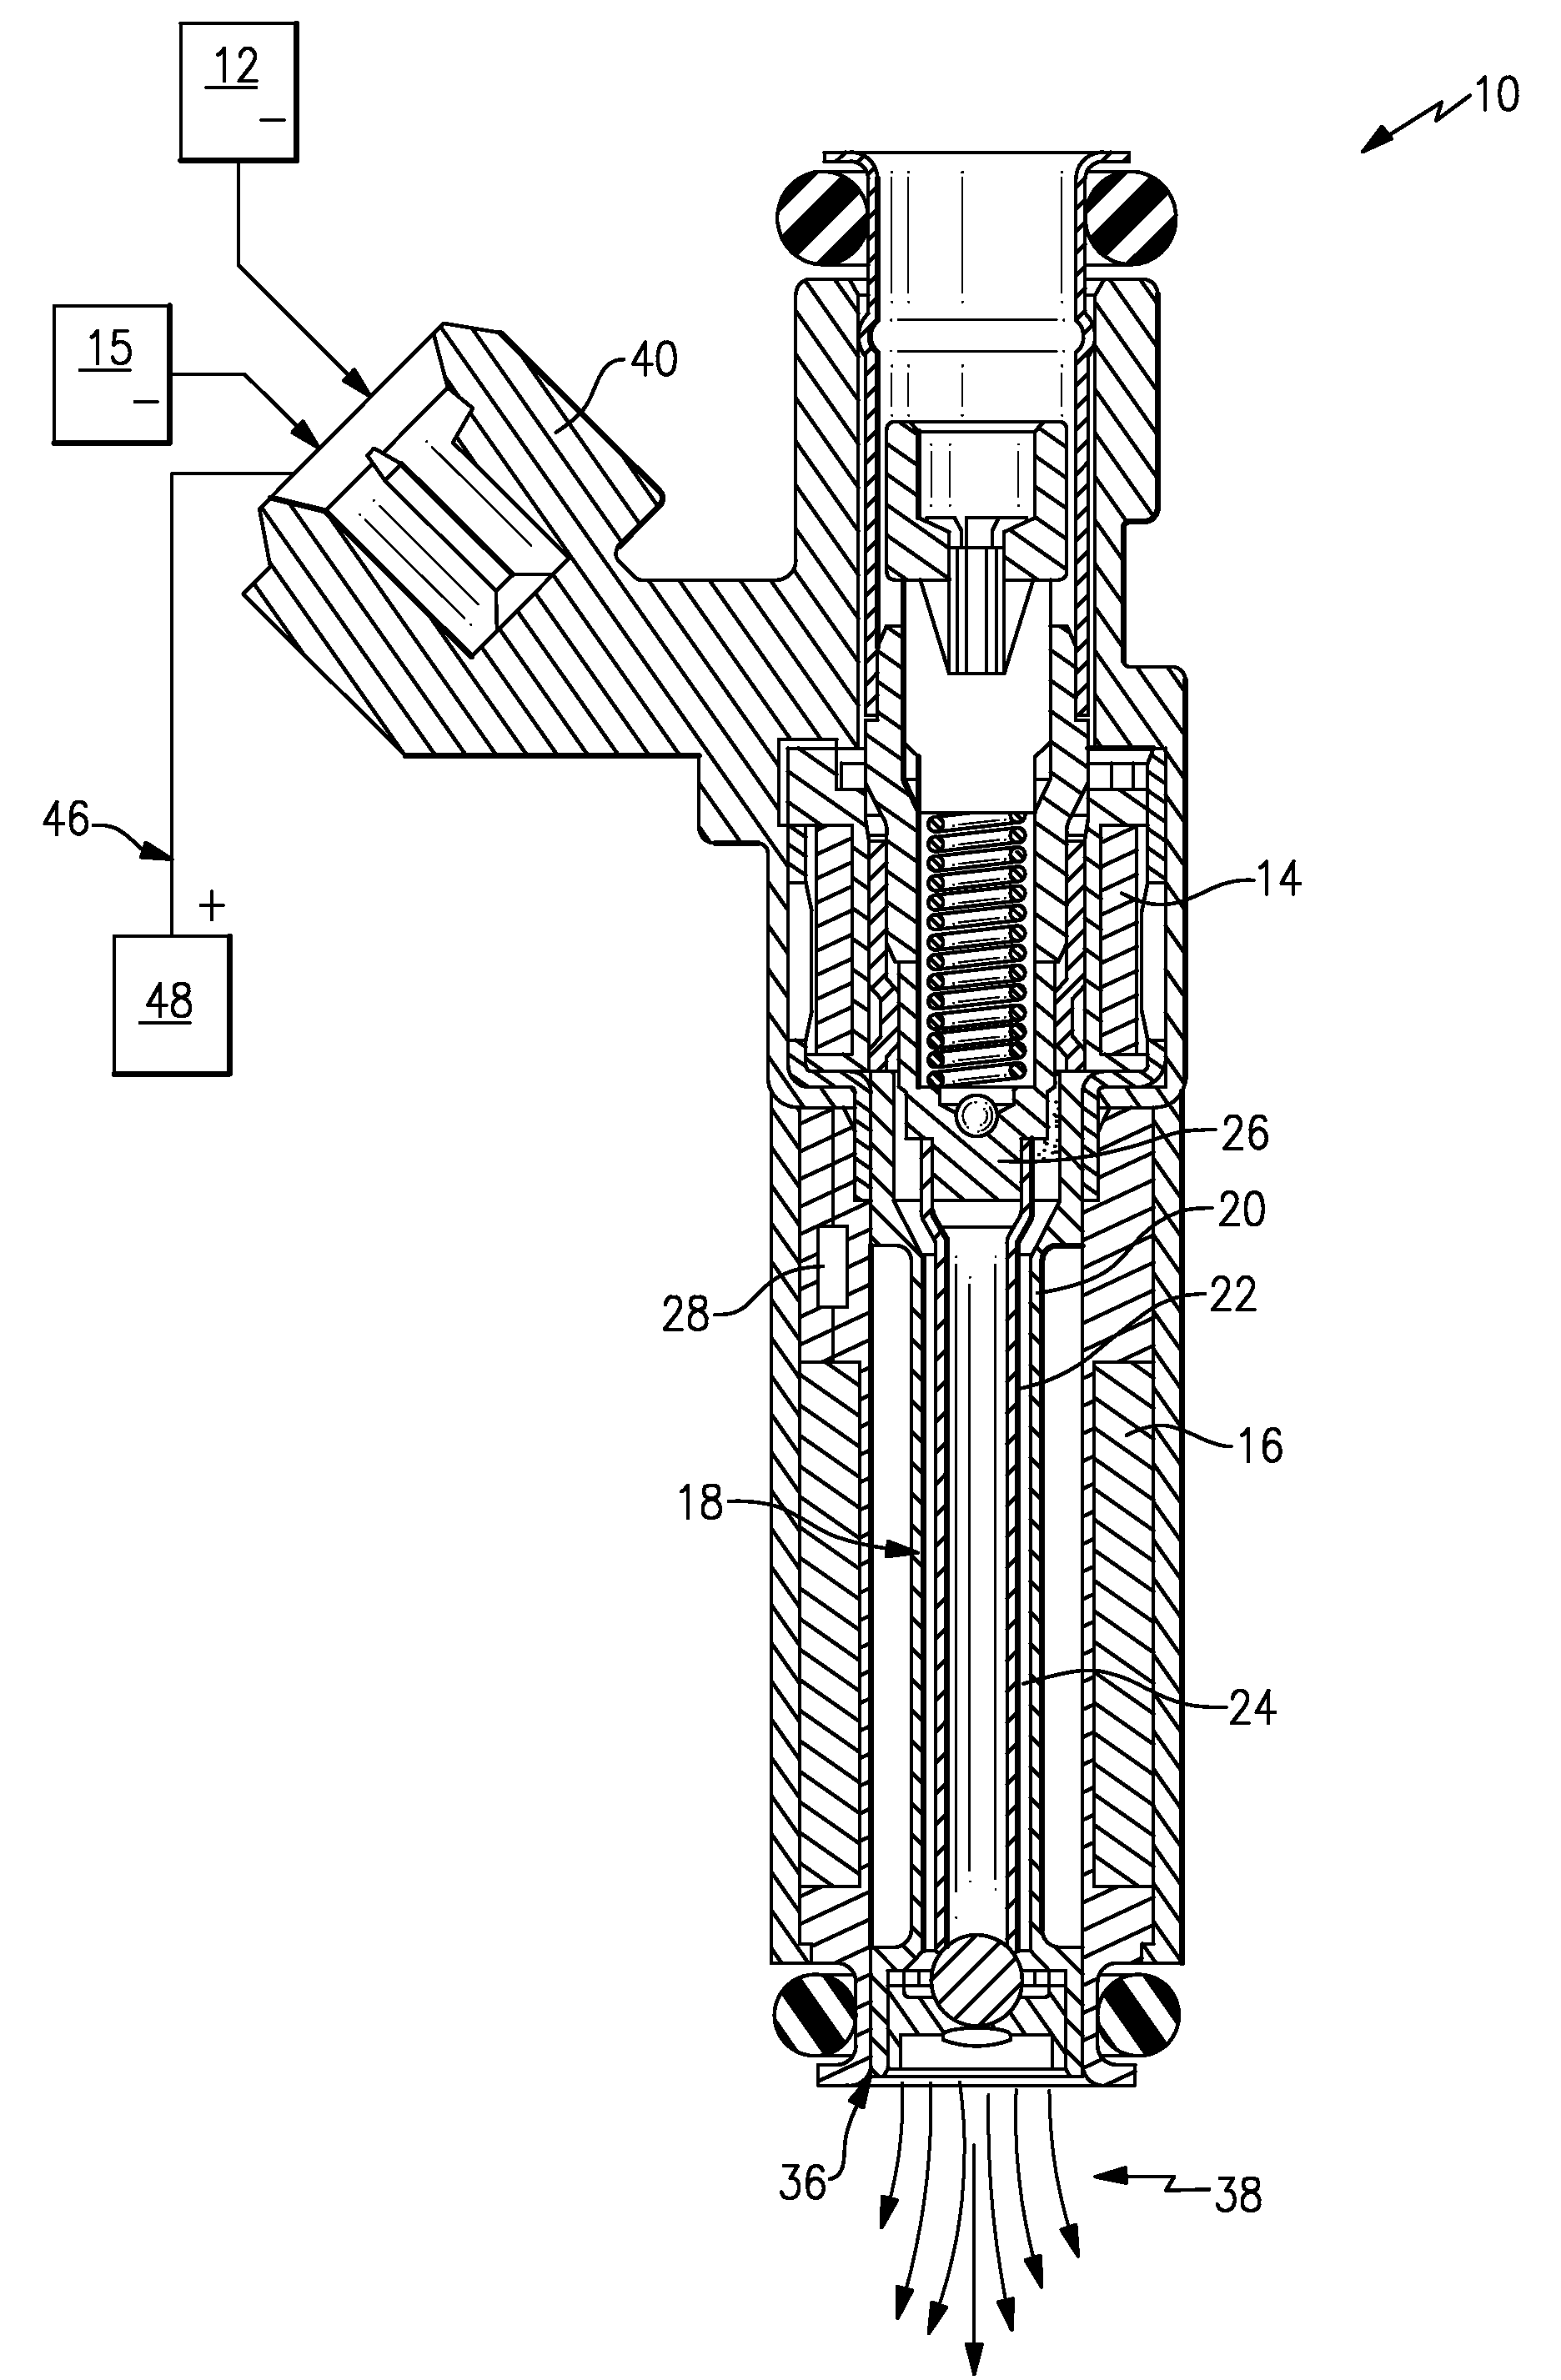 Inductive heated injector using a three wire connection